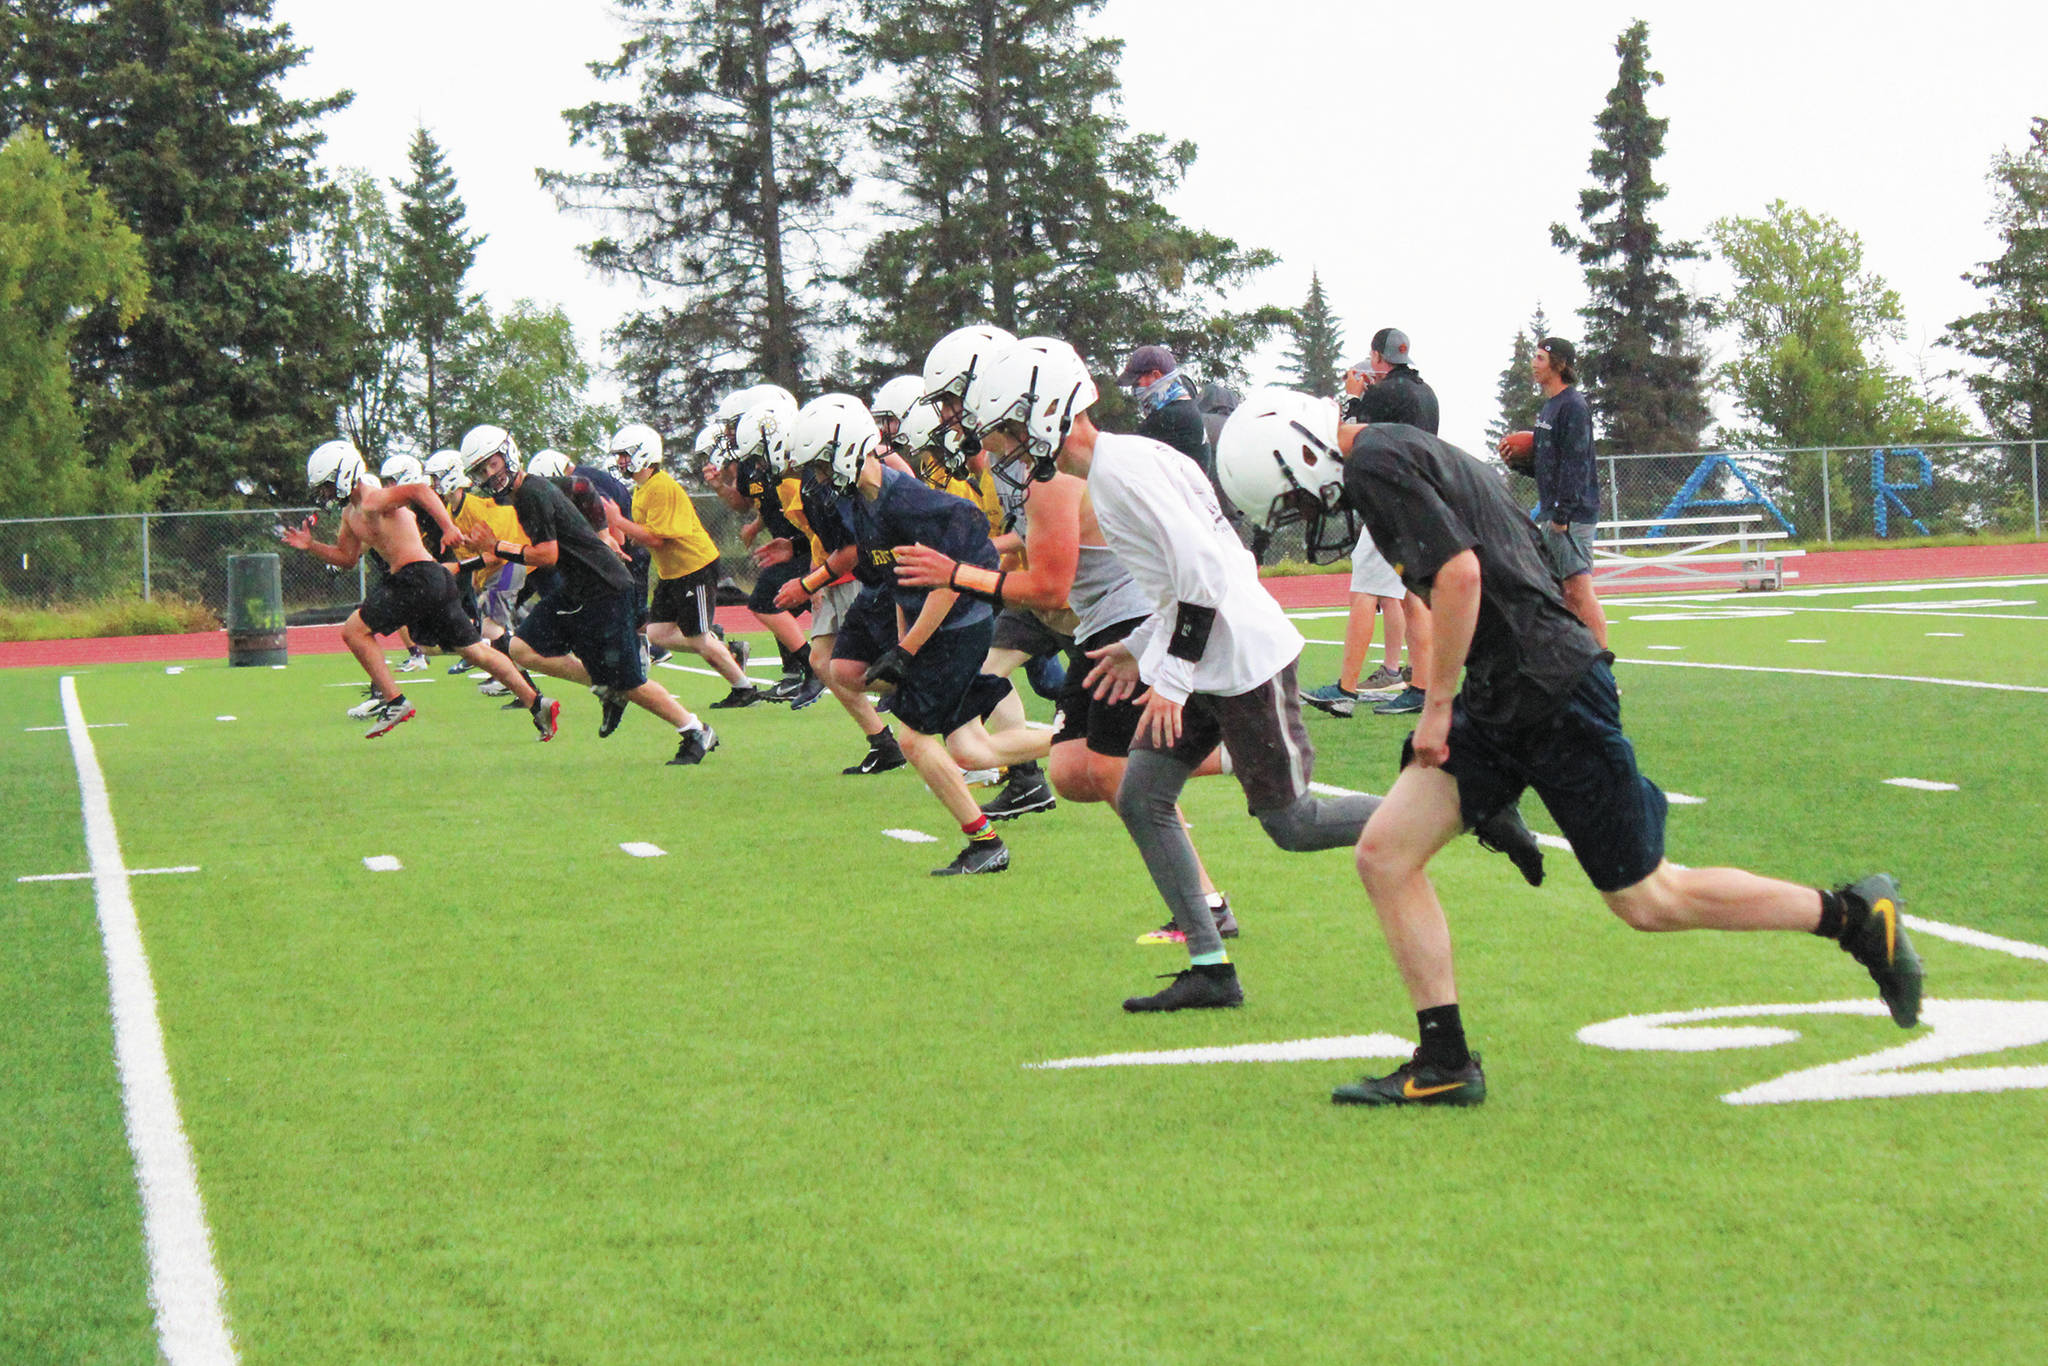 Members of the Homer High School football team complete running drills during a Tuesday, Aug. 18, 2020 practice on the turf field outside the high school in Homer, Alaska. (Photo by Megan Pacer/Homer News)